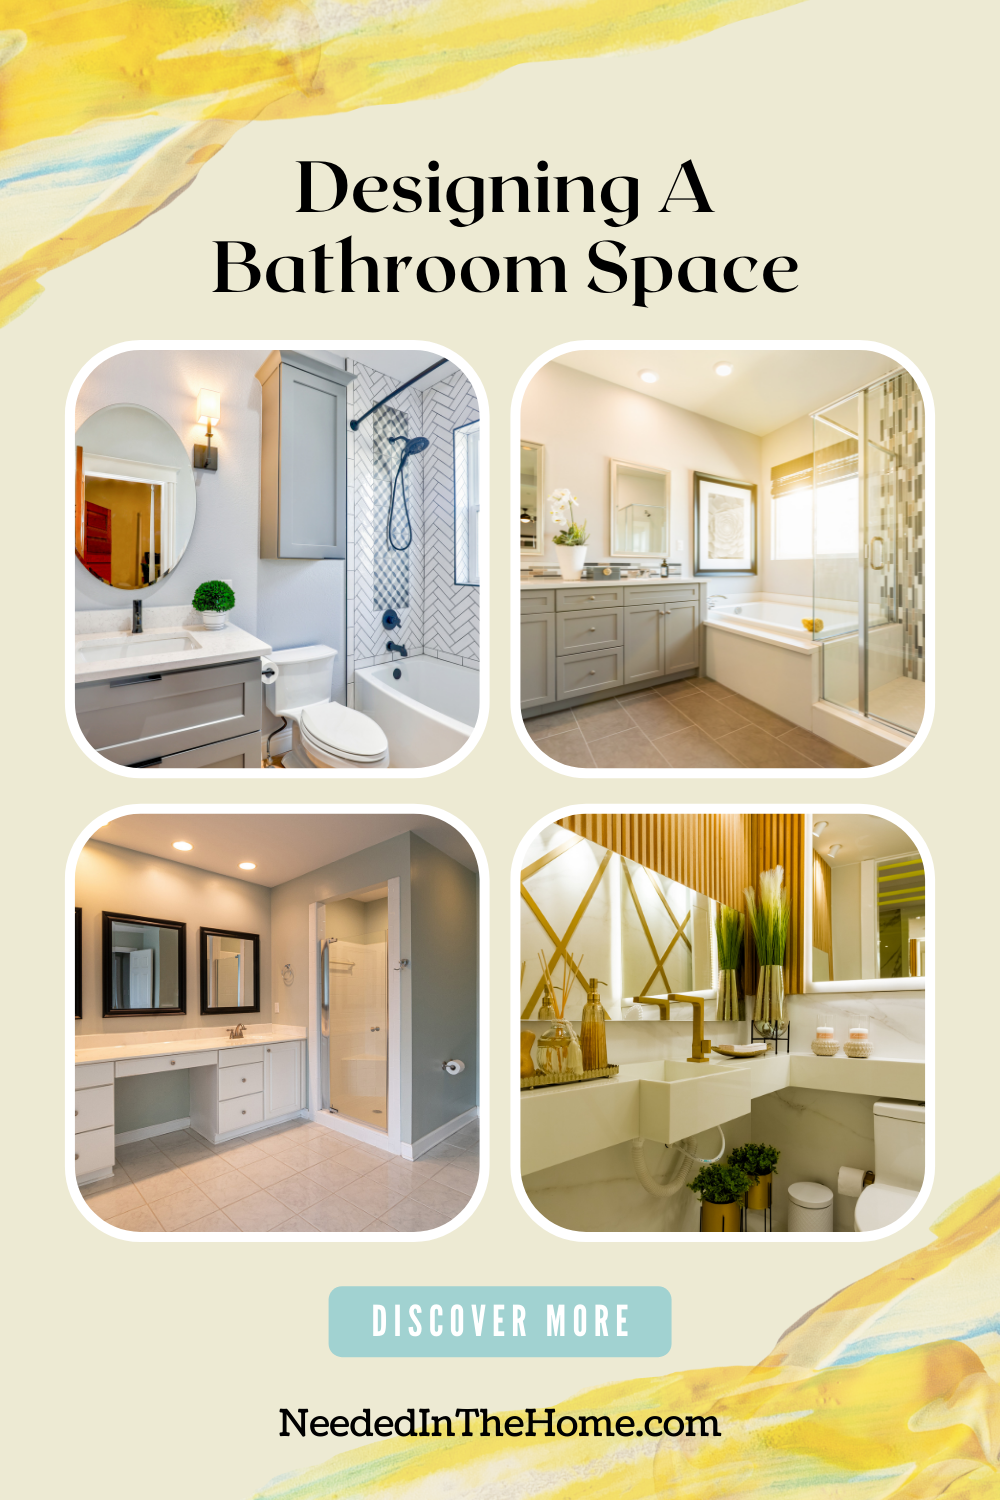 pinterest-pin-description designing a bathroom space images of four bathroom styles discover more button yellow and aqua color splashed corners neededinthehome